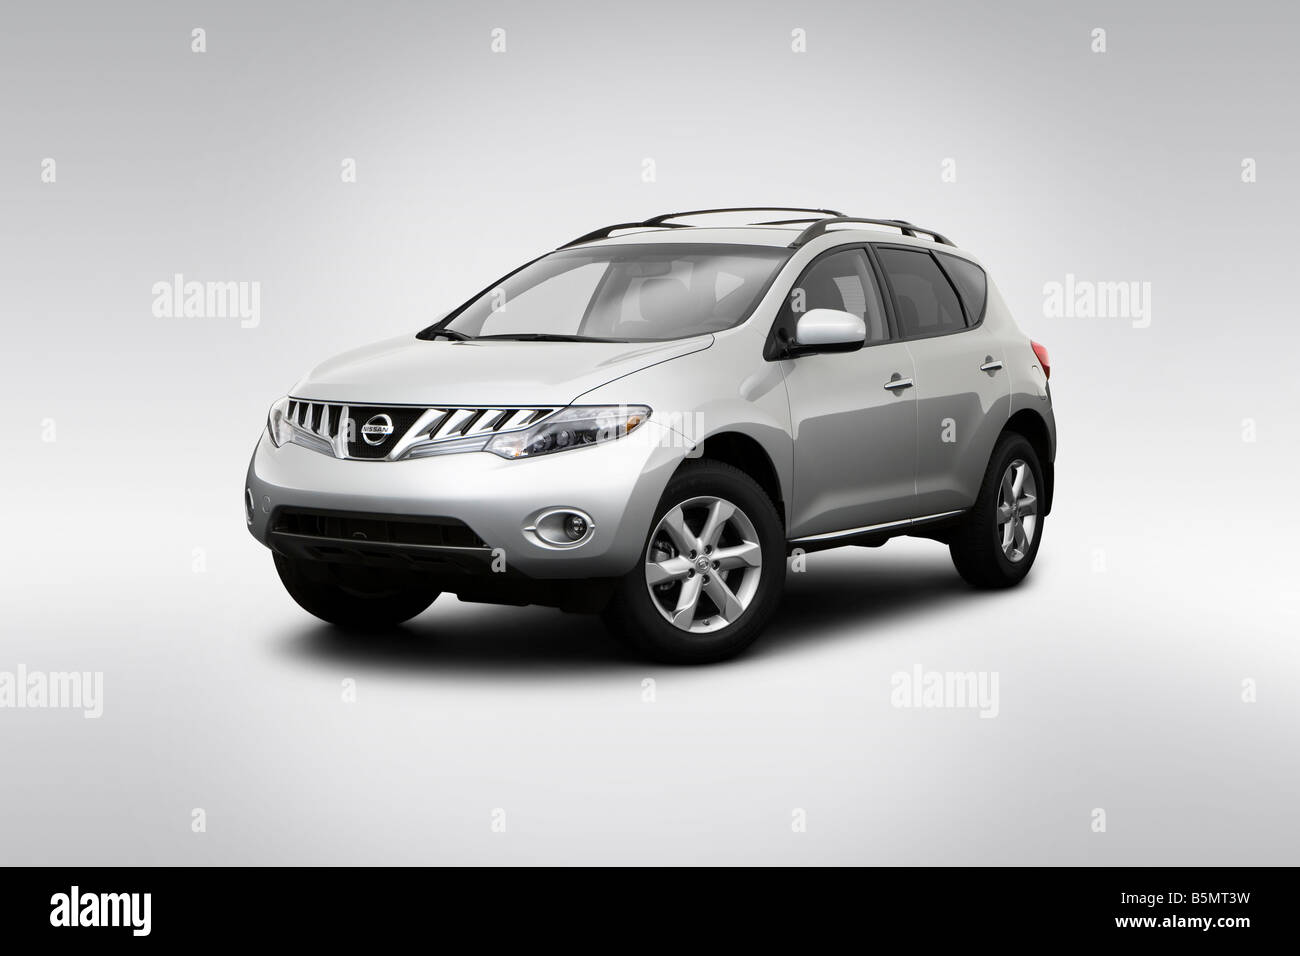 2009 Nissan Murano SL in Silver - Front angle view Stock Photo